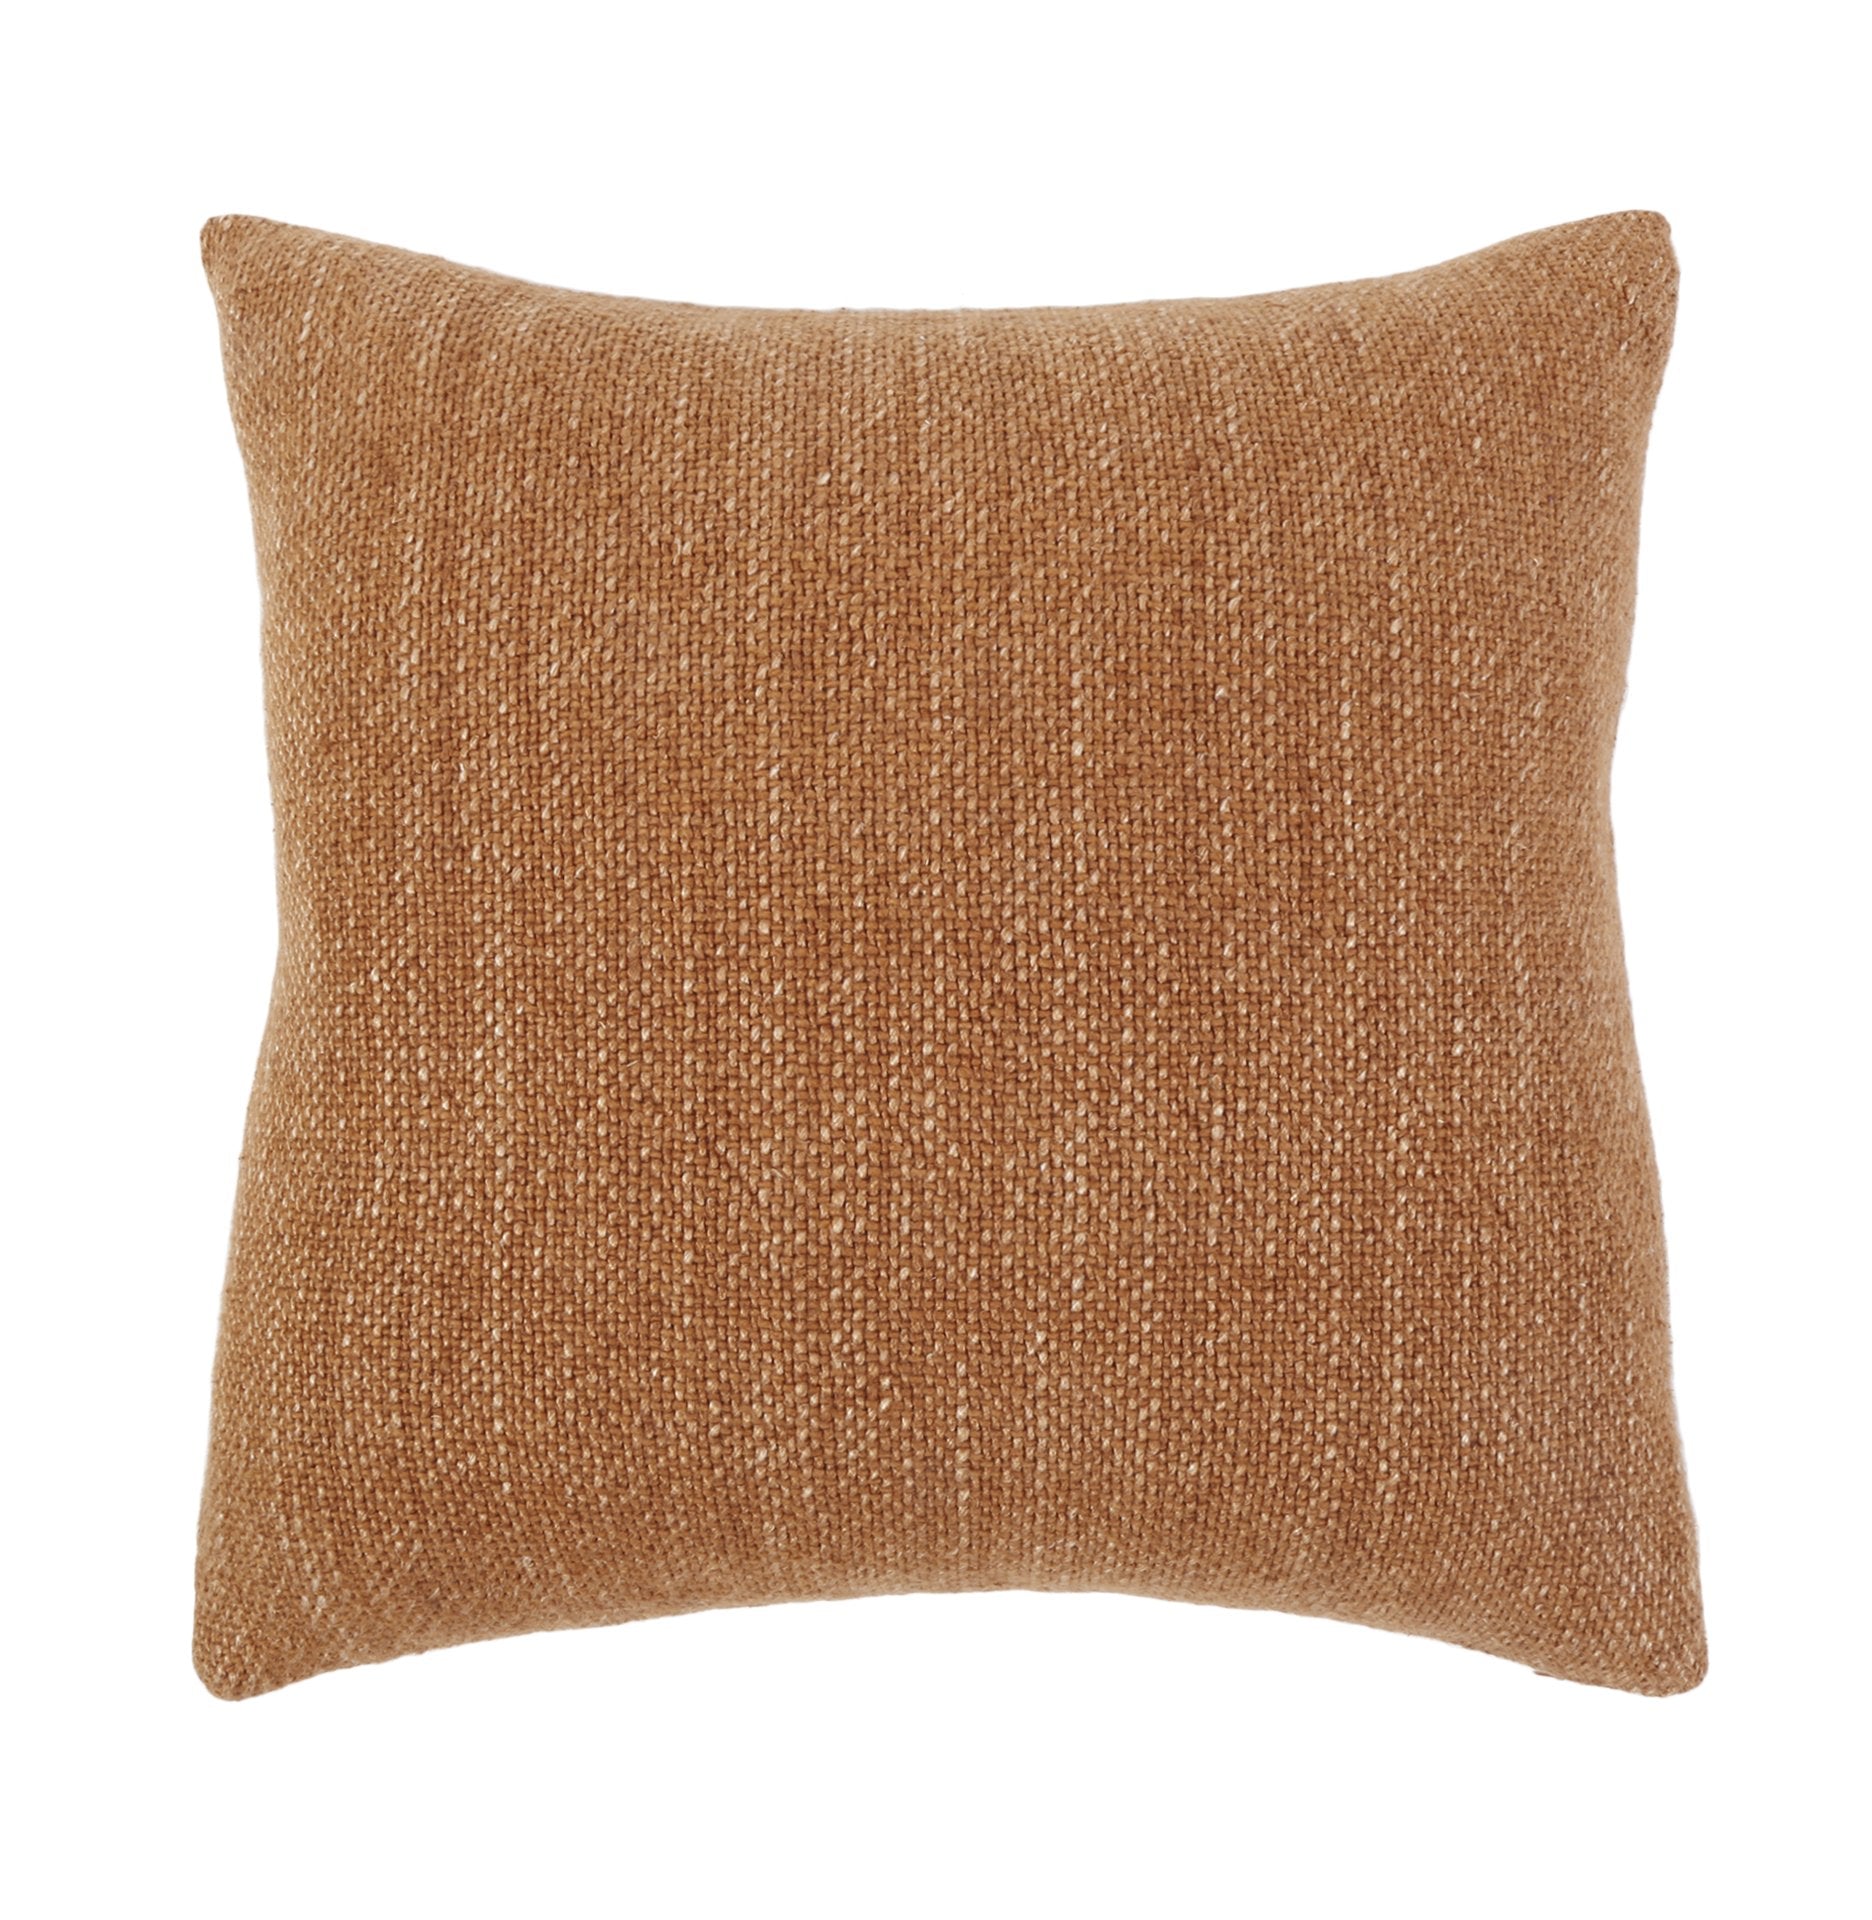 Hendrick 20" Pillow with Insert - 7 colors-Pom Pom at Home